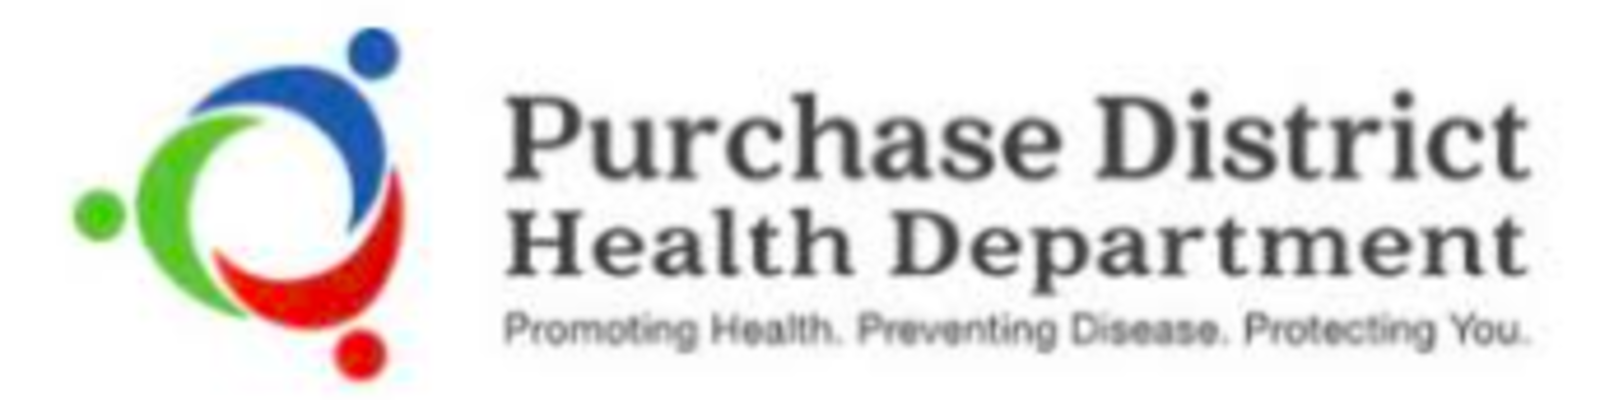 Purchase District Health Department discontinuing COVID-19 PCR and drive thru vaccine